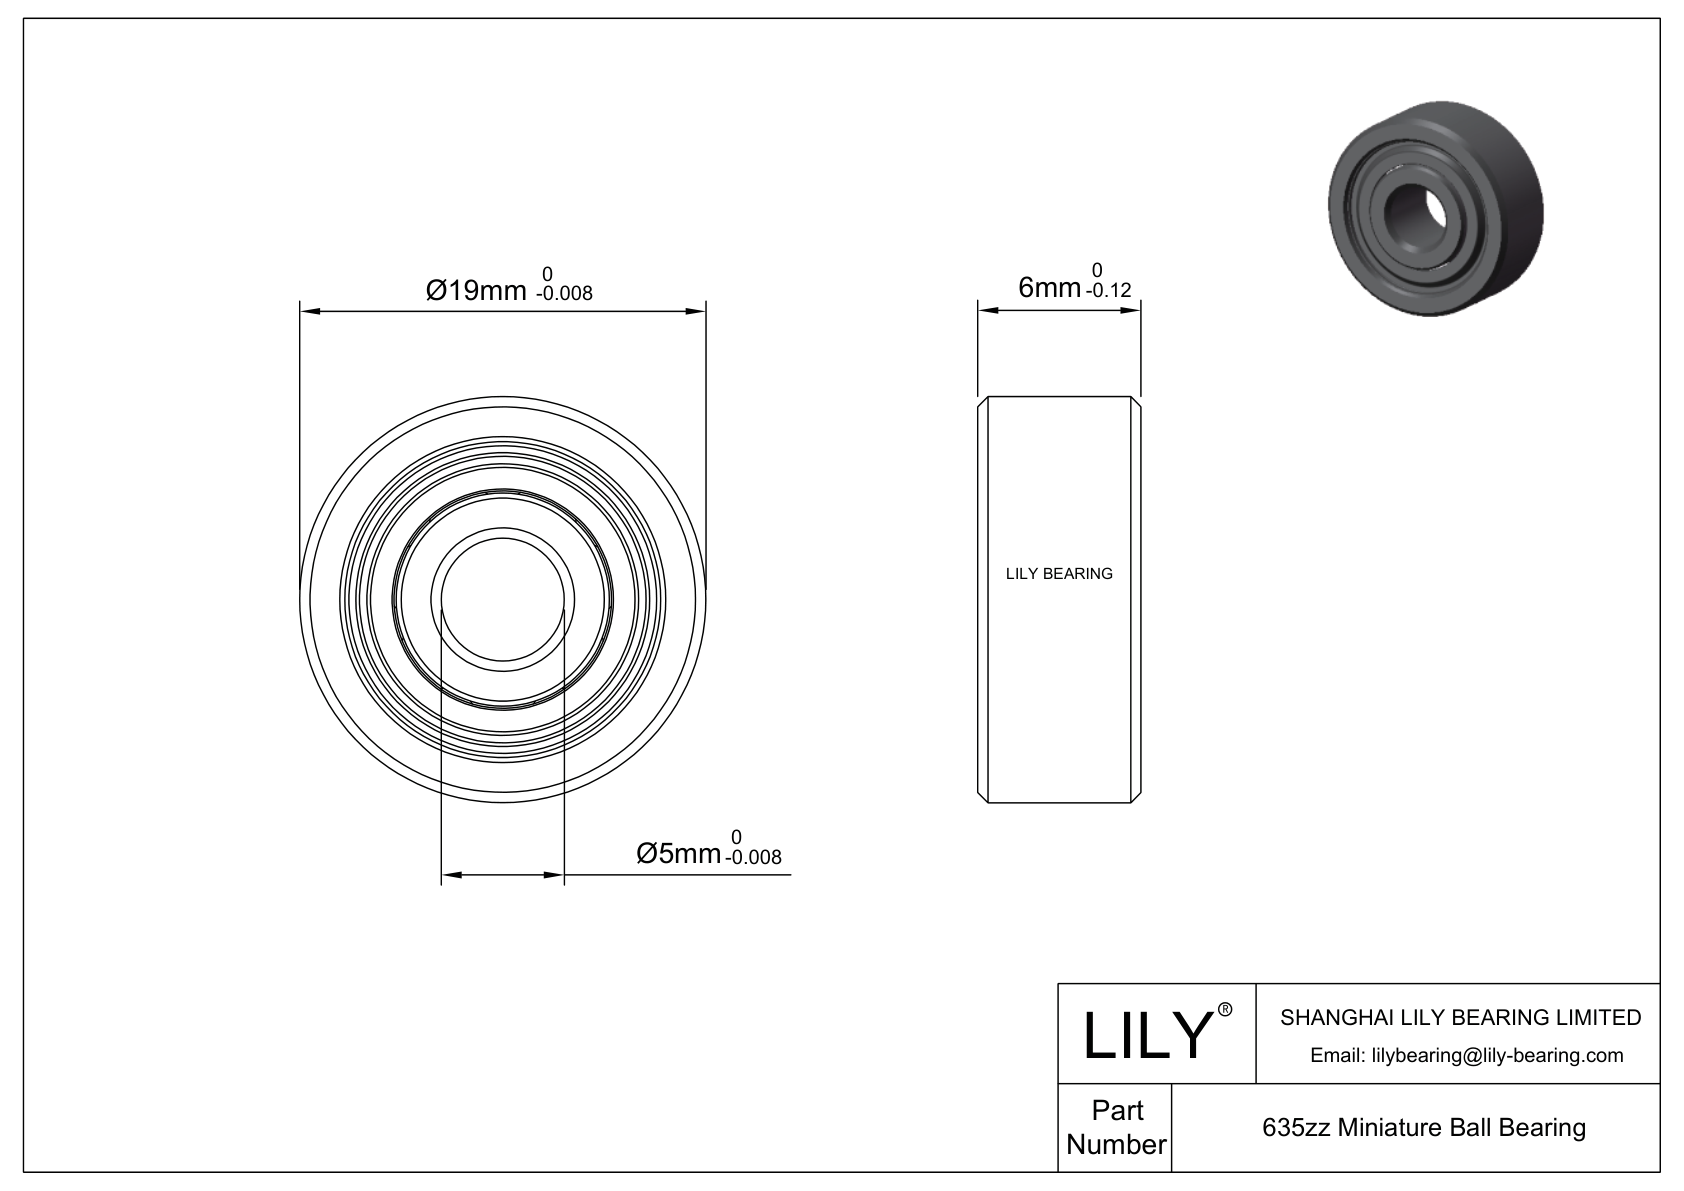 LILY-BST63530-30 Outsourcing POM bearings cad drawing